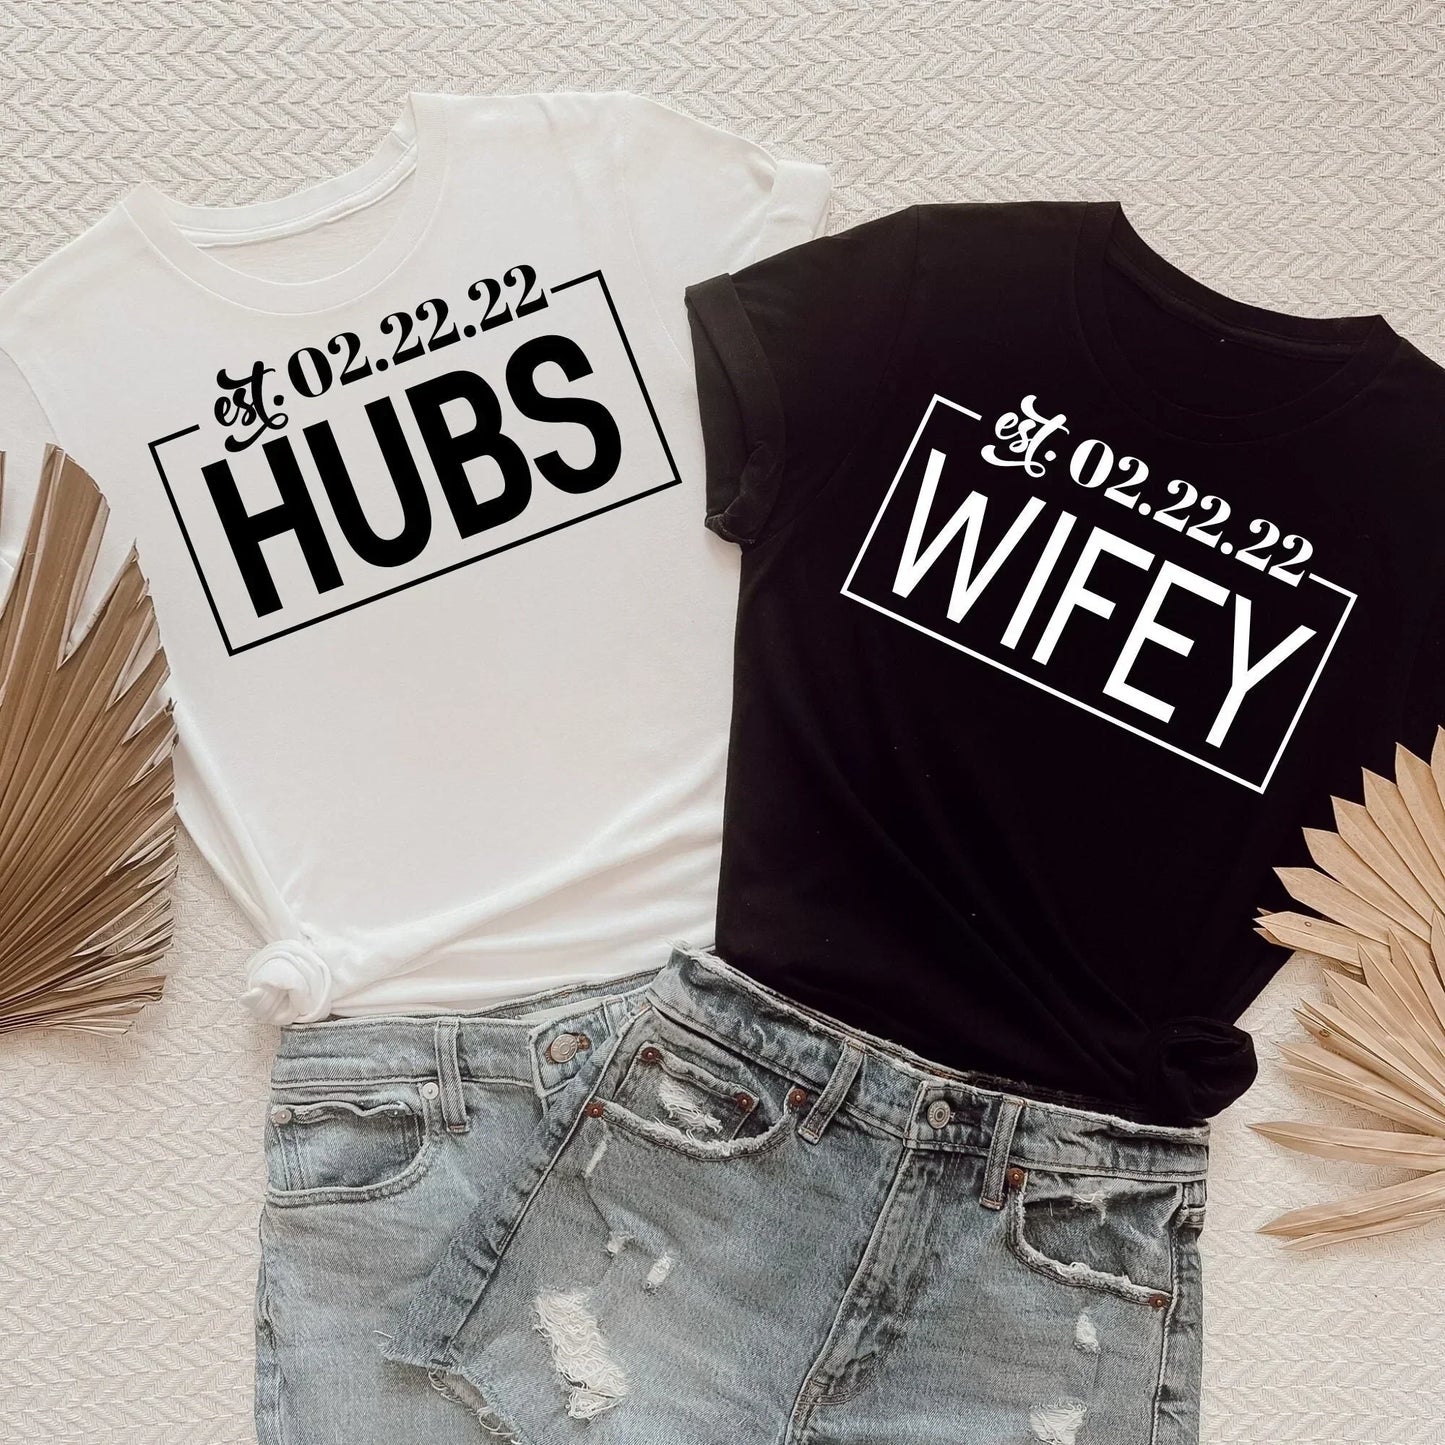 Mr and Mrs Shirts, Just Married Shirts, Mrs Sweatshirt, Wife Shirt, Wifey Sweatshirt, Future Mrs Shirt, Hubby Wifey Shirts, Wifey Hoodie HMDesignStudioUS